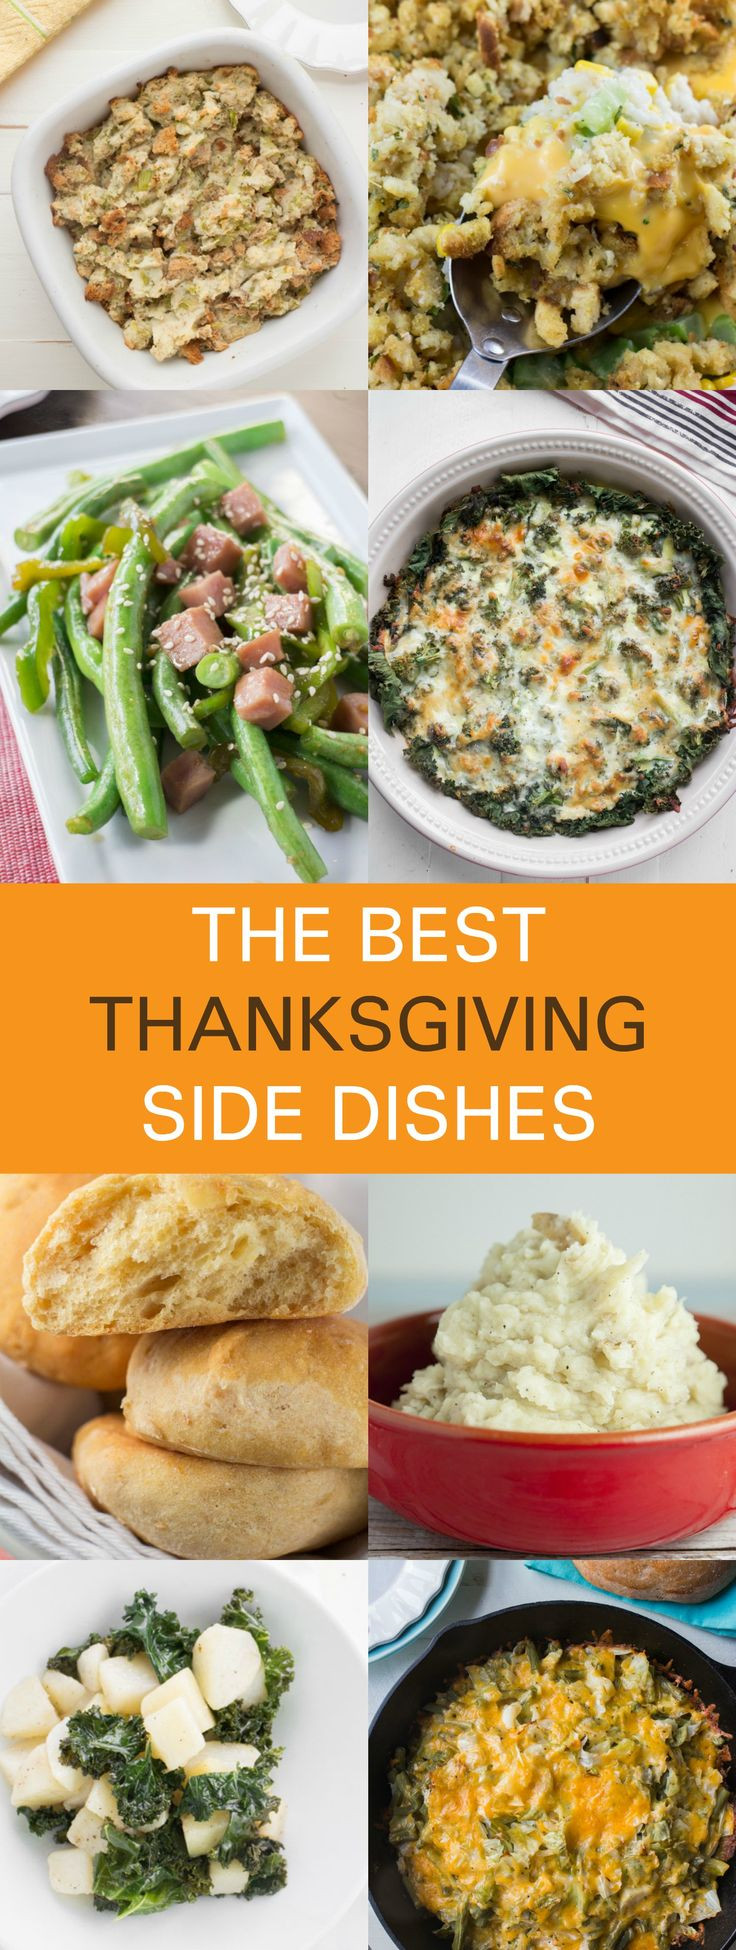 Top Thanksgiving Side Dishes
 17 Best images about Thanksgiving on Pinterest